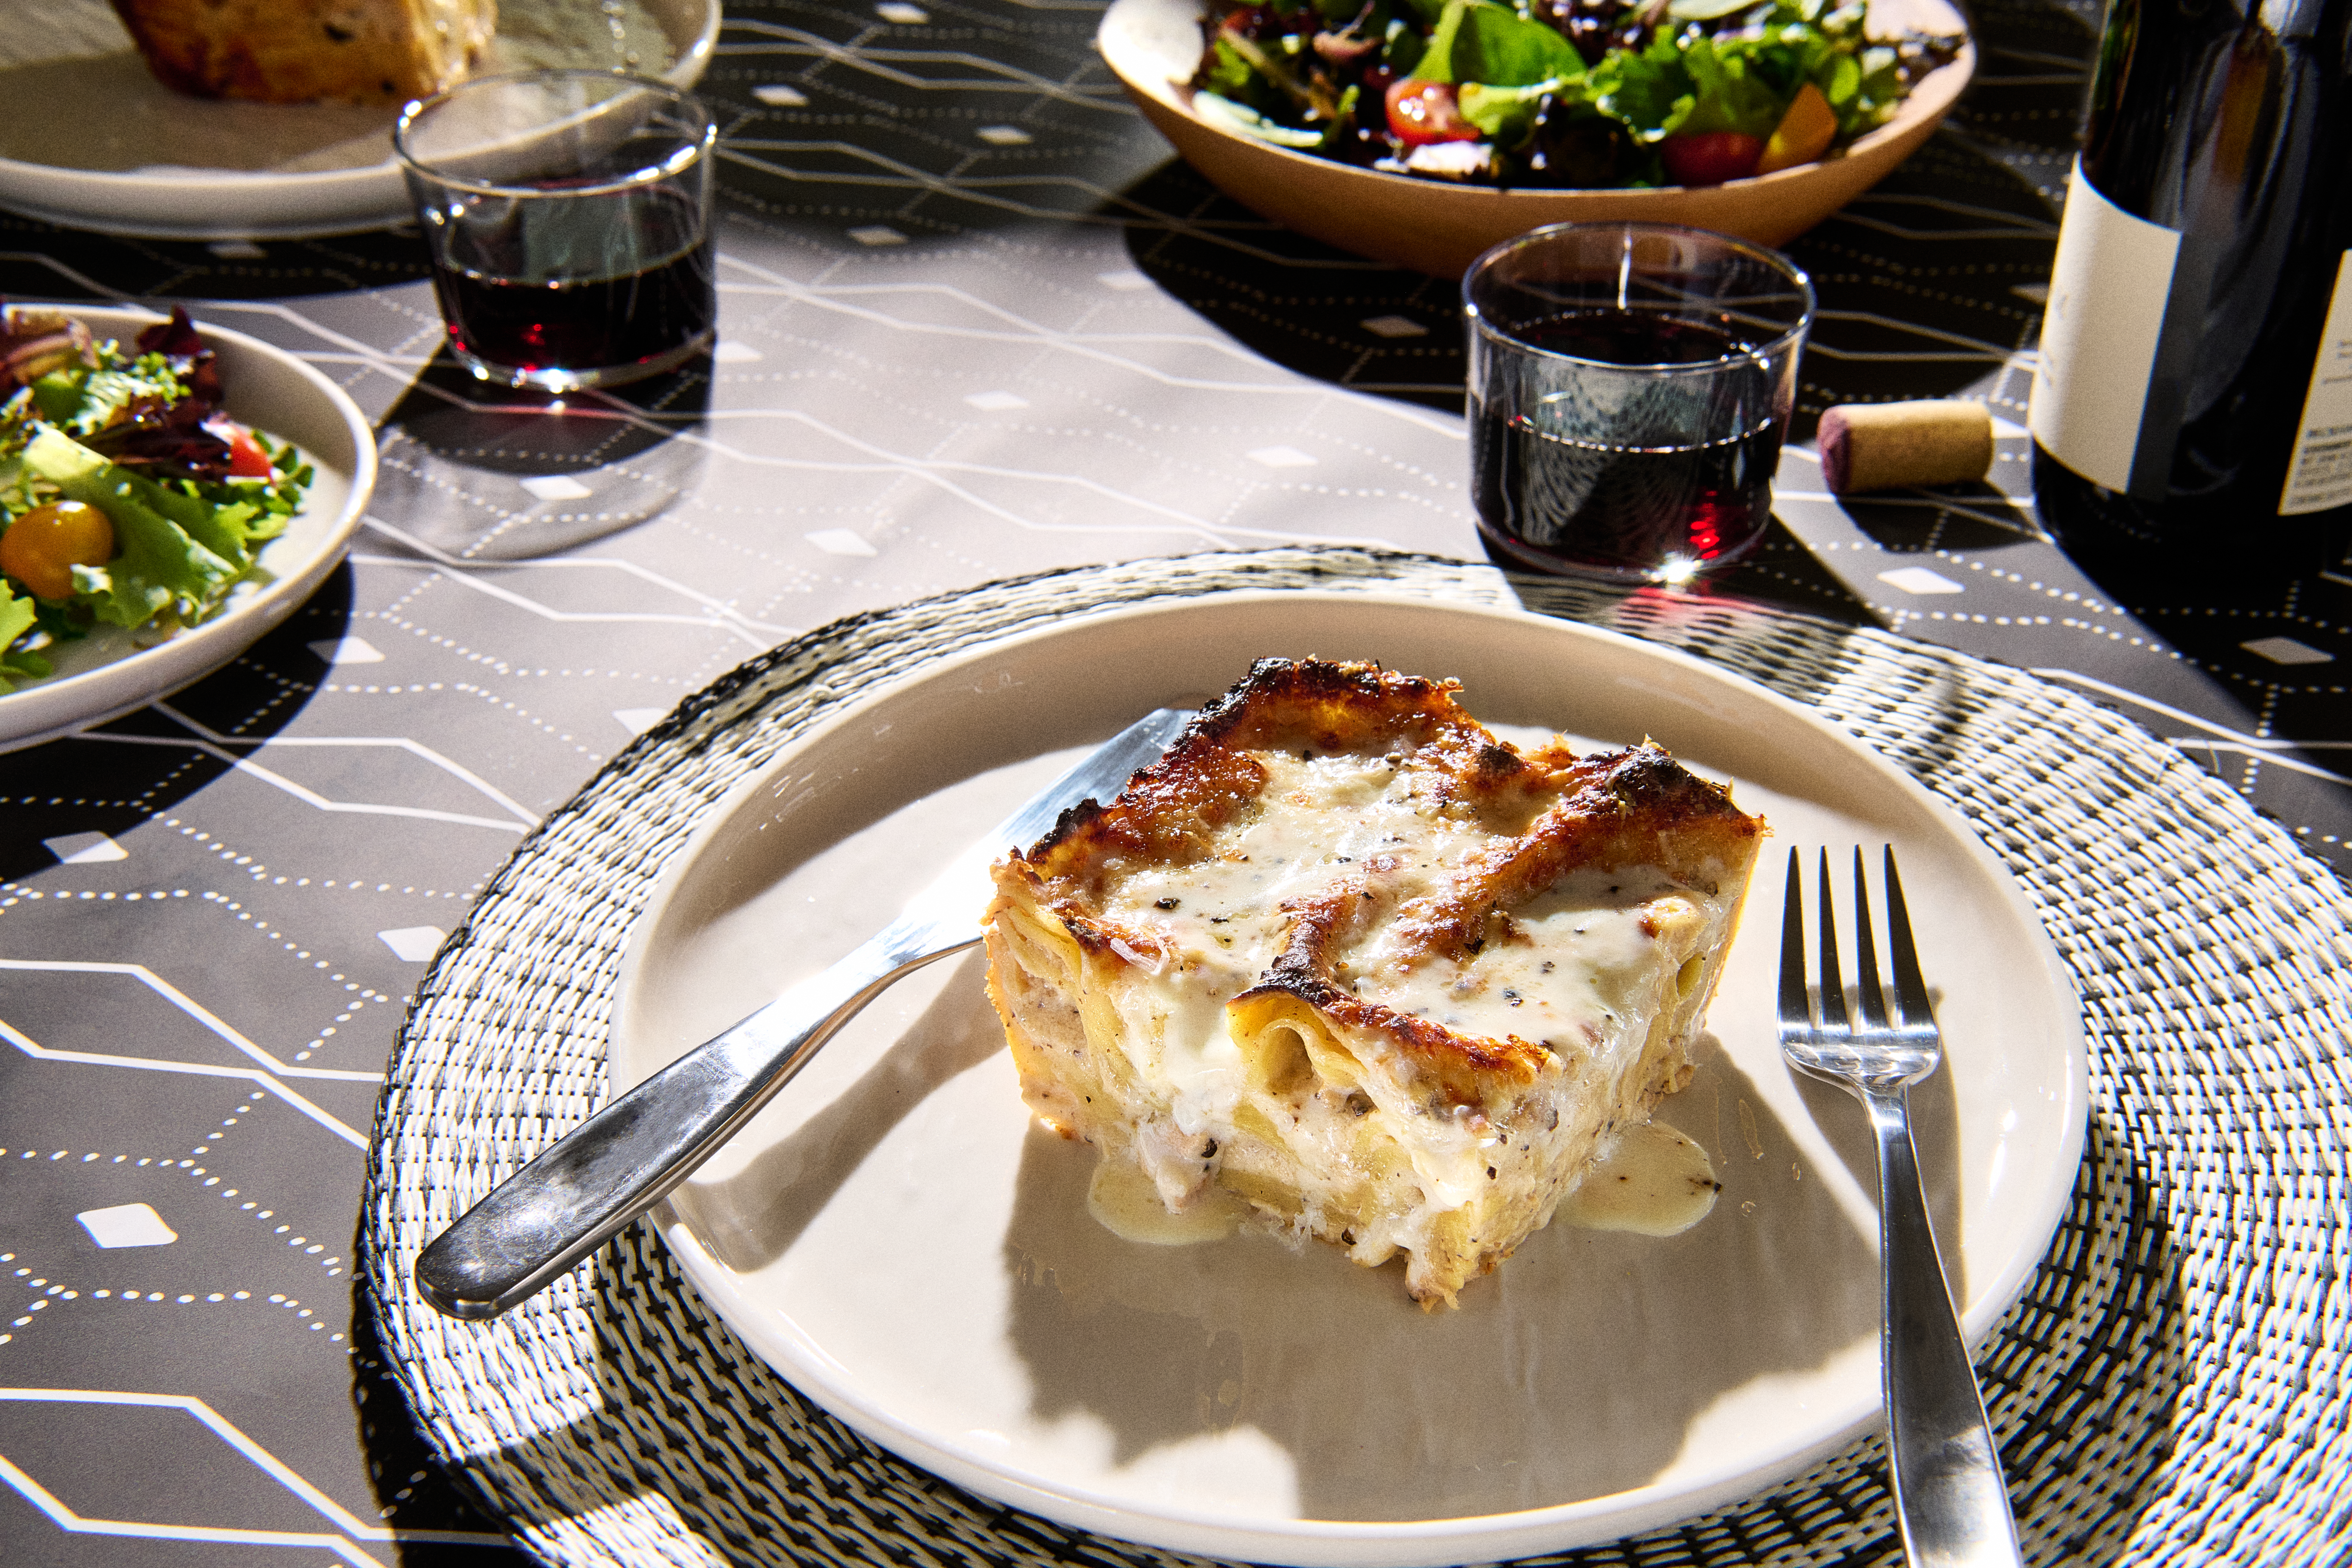 A square of lasagna served on a plate, with glasses of red wine and a salad nearby.